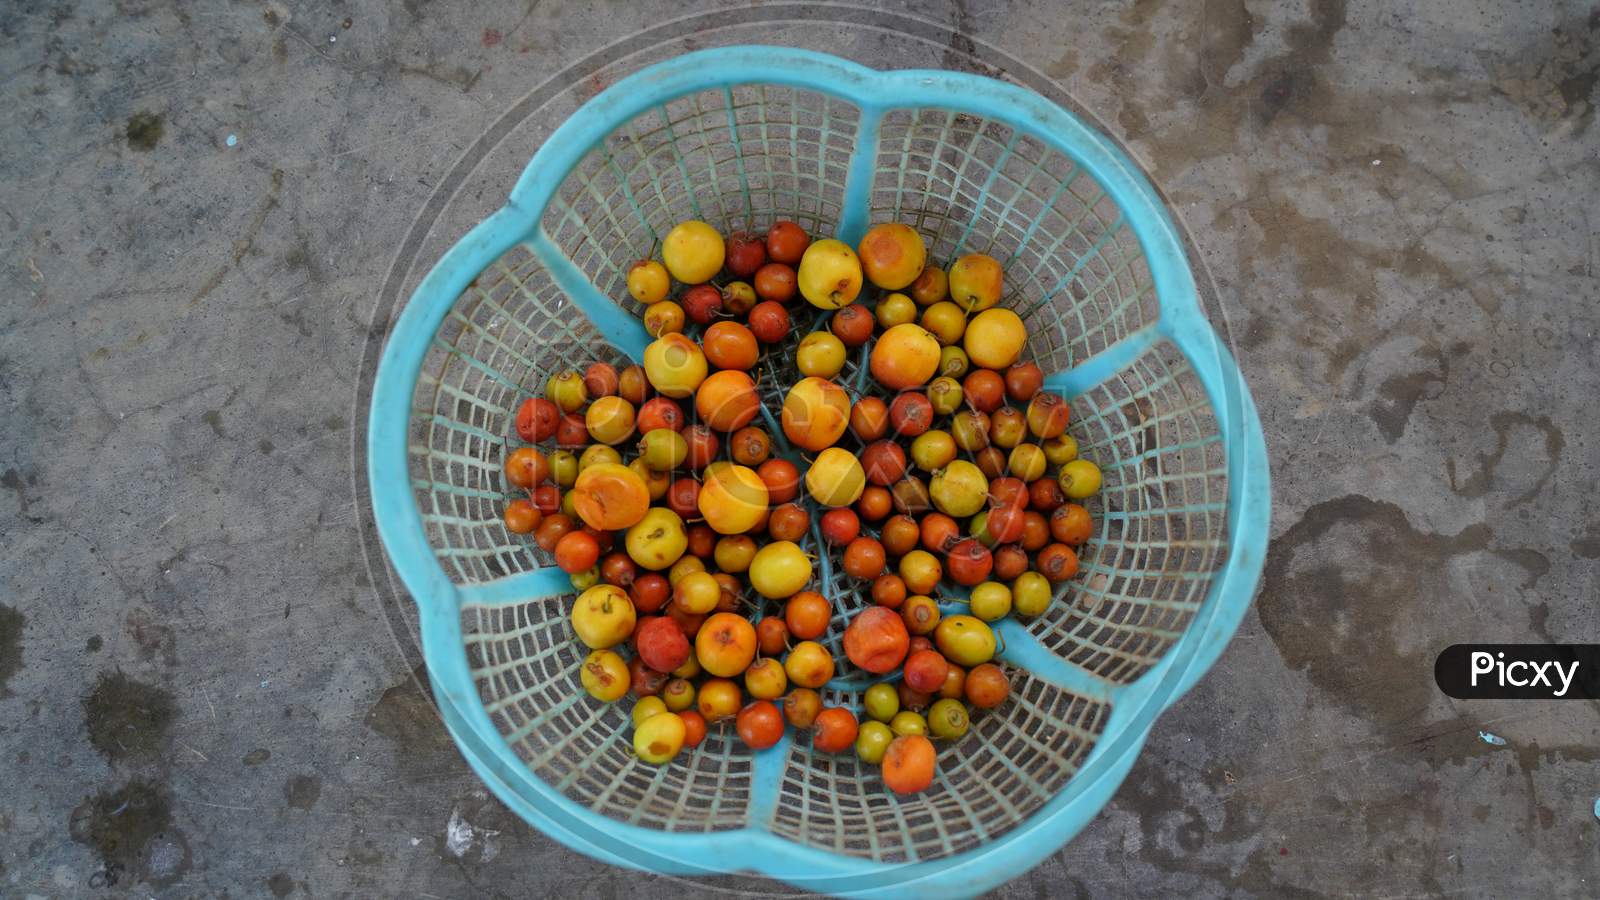 Red Yellow Ber Or Ziziphus Mauritiana Fruits Isolated On Plastic Basket. Ripen Fruits On The Cement Floor Ground.